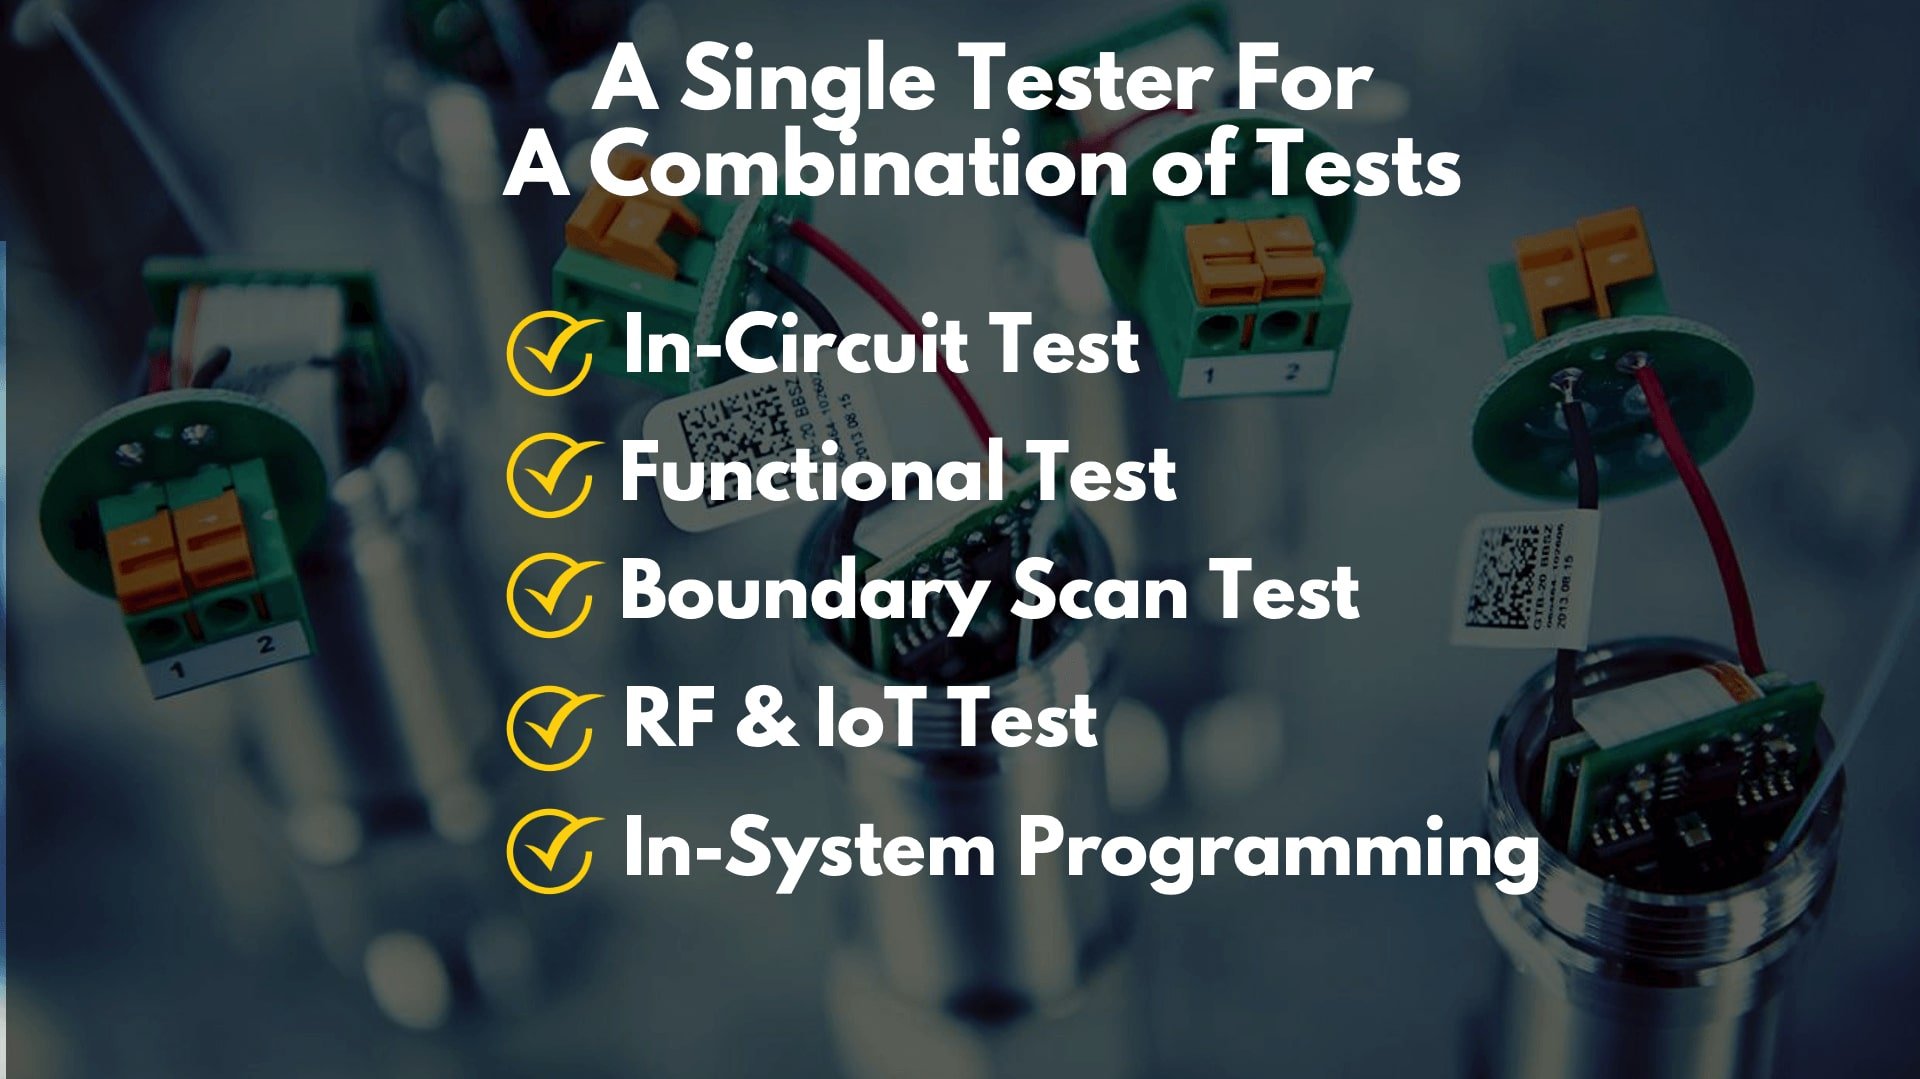 limitations of existing tests